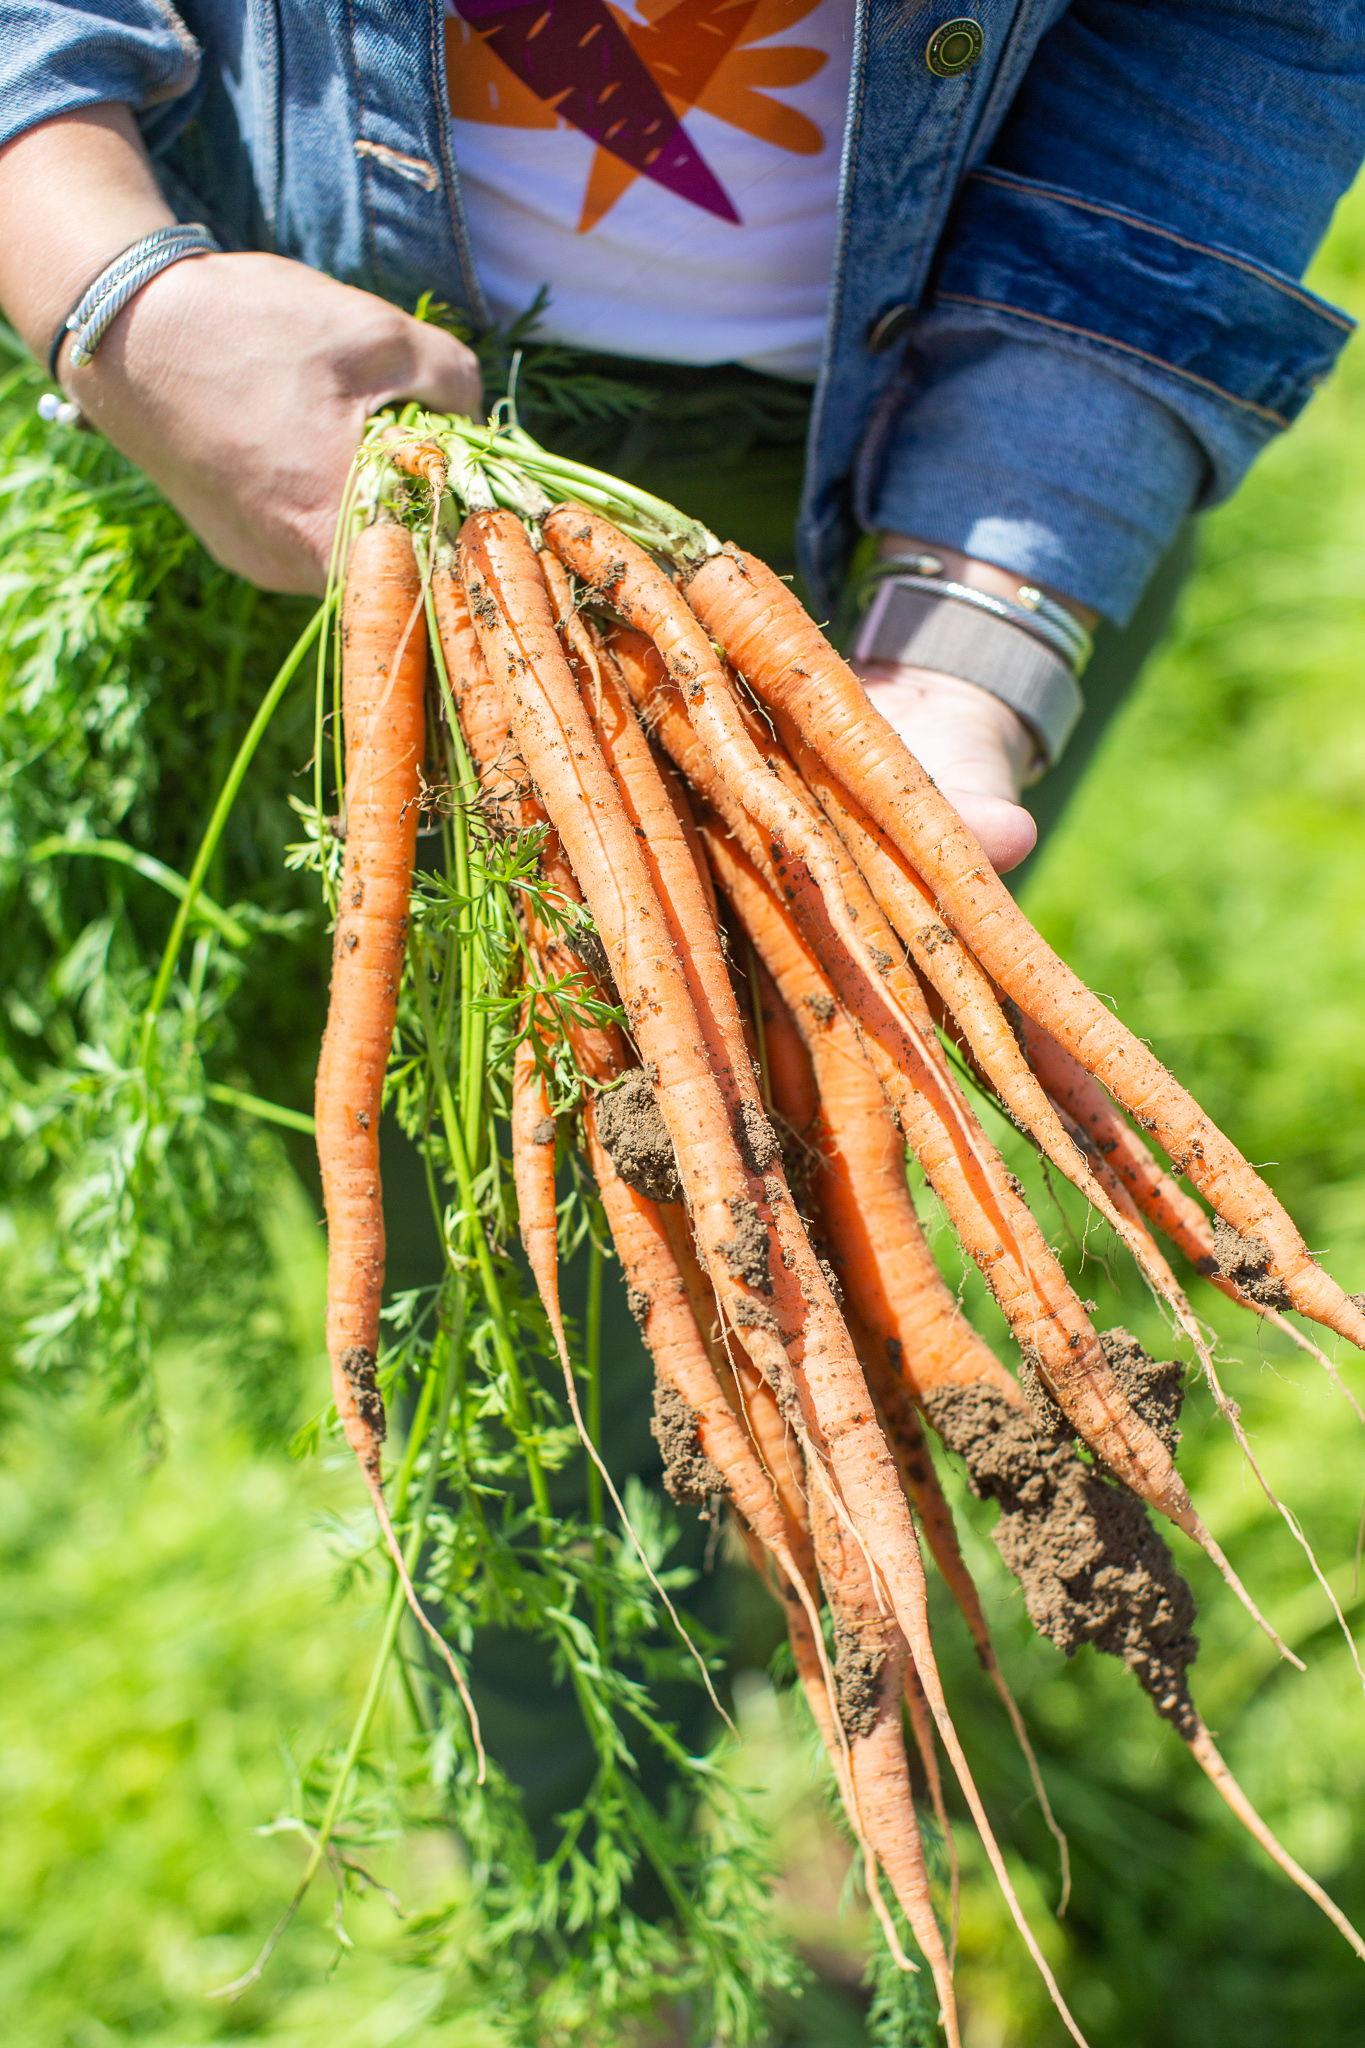 Bolthouse Farms Bakersfield Visit – Our California Trip Recap by popular North Carolina lifestyle blog, Coffee Beans and Bobby Pins: close up image of a woman holding bunch of freshly picked carrots in her hand at the Bolthouse Farms in Bakersfield, California.